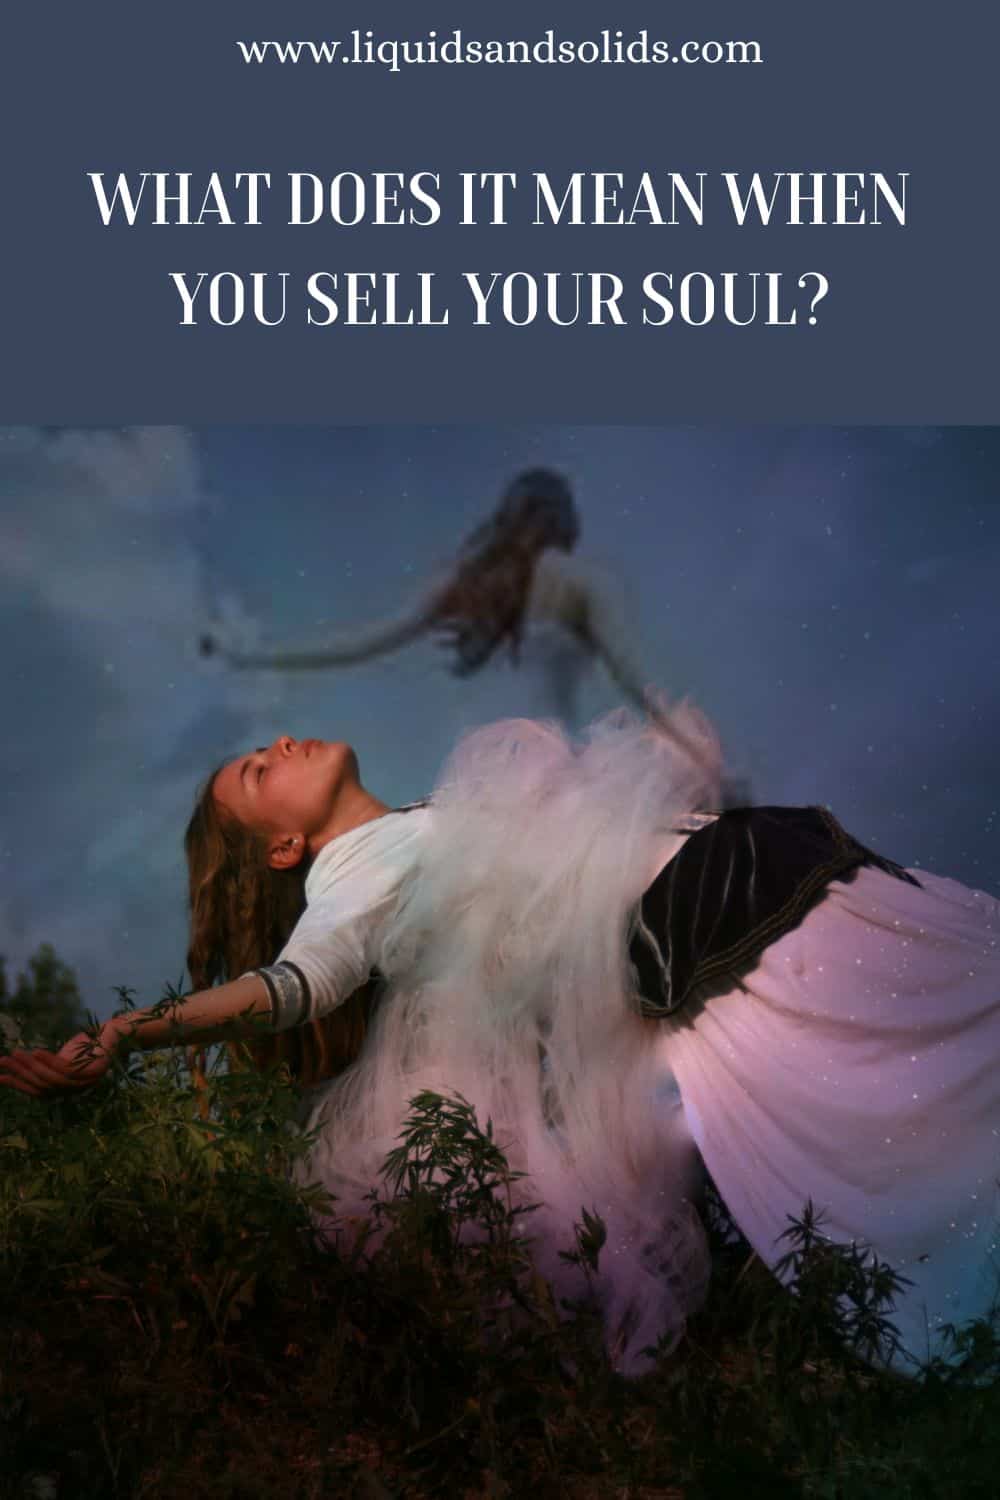 What Does It Mean When You Sell Your Soul?